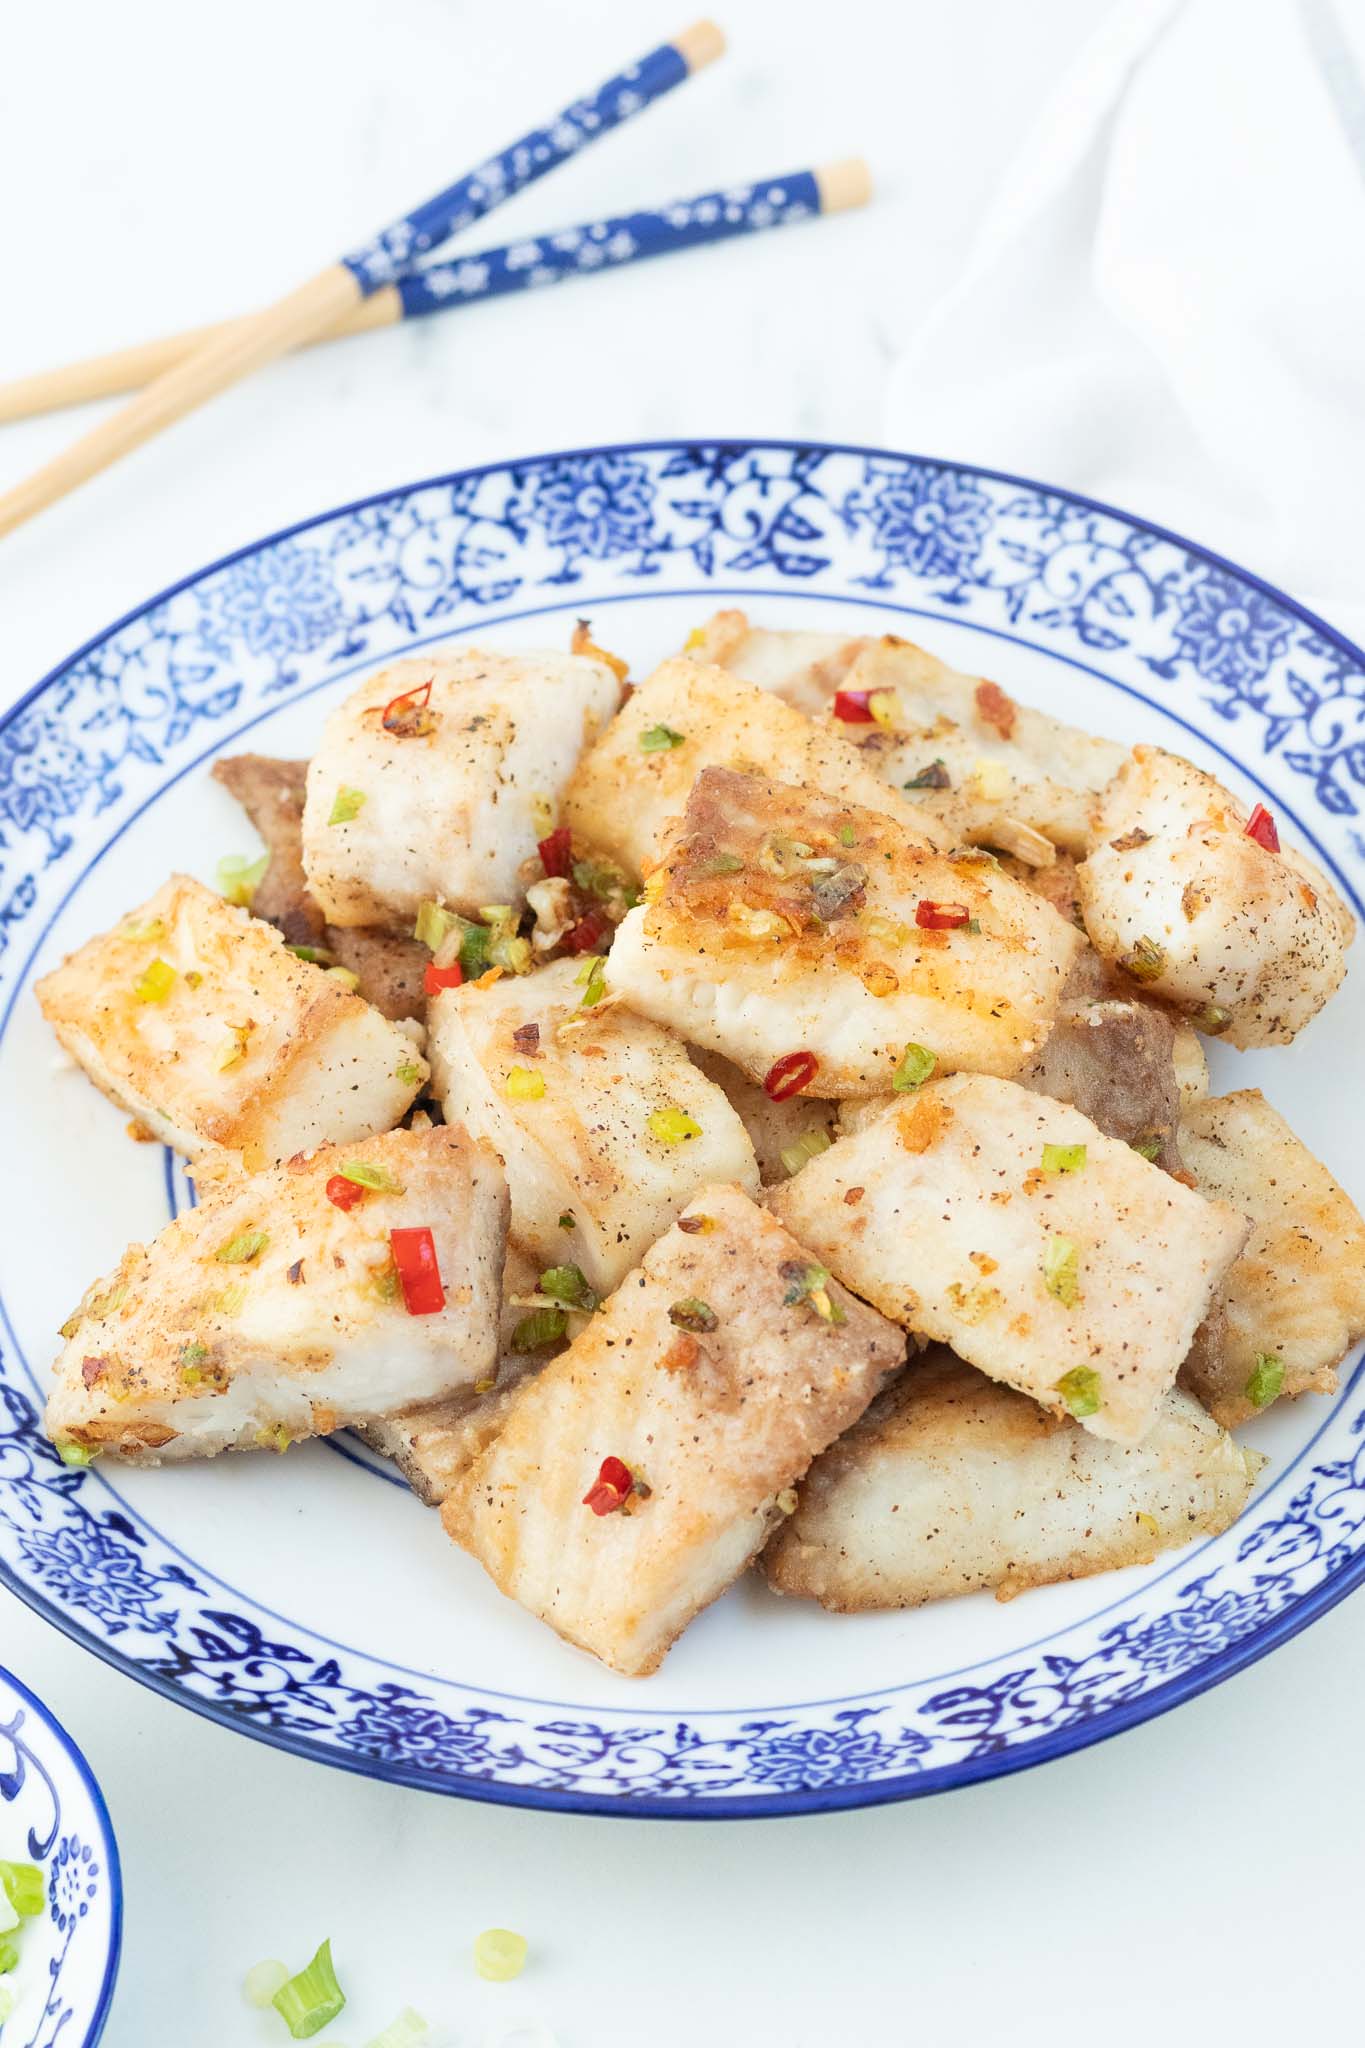 Chinese Salt and Pepper Fish - How to Make Chinese Fish